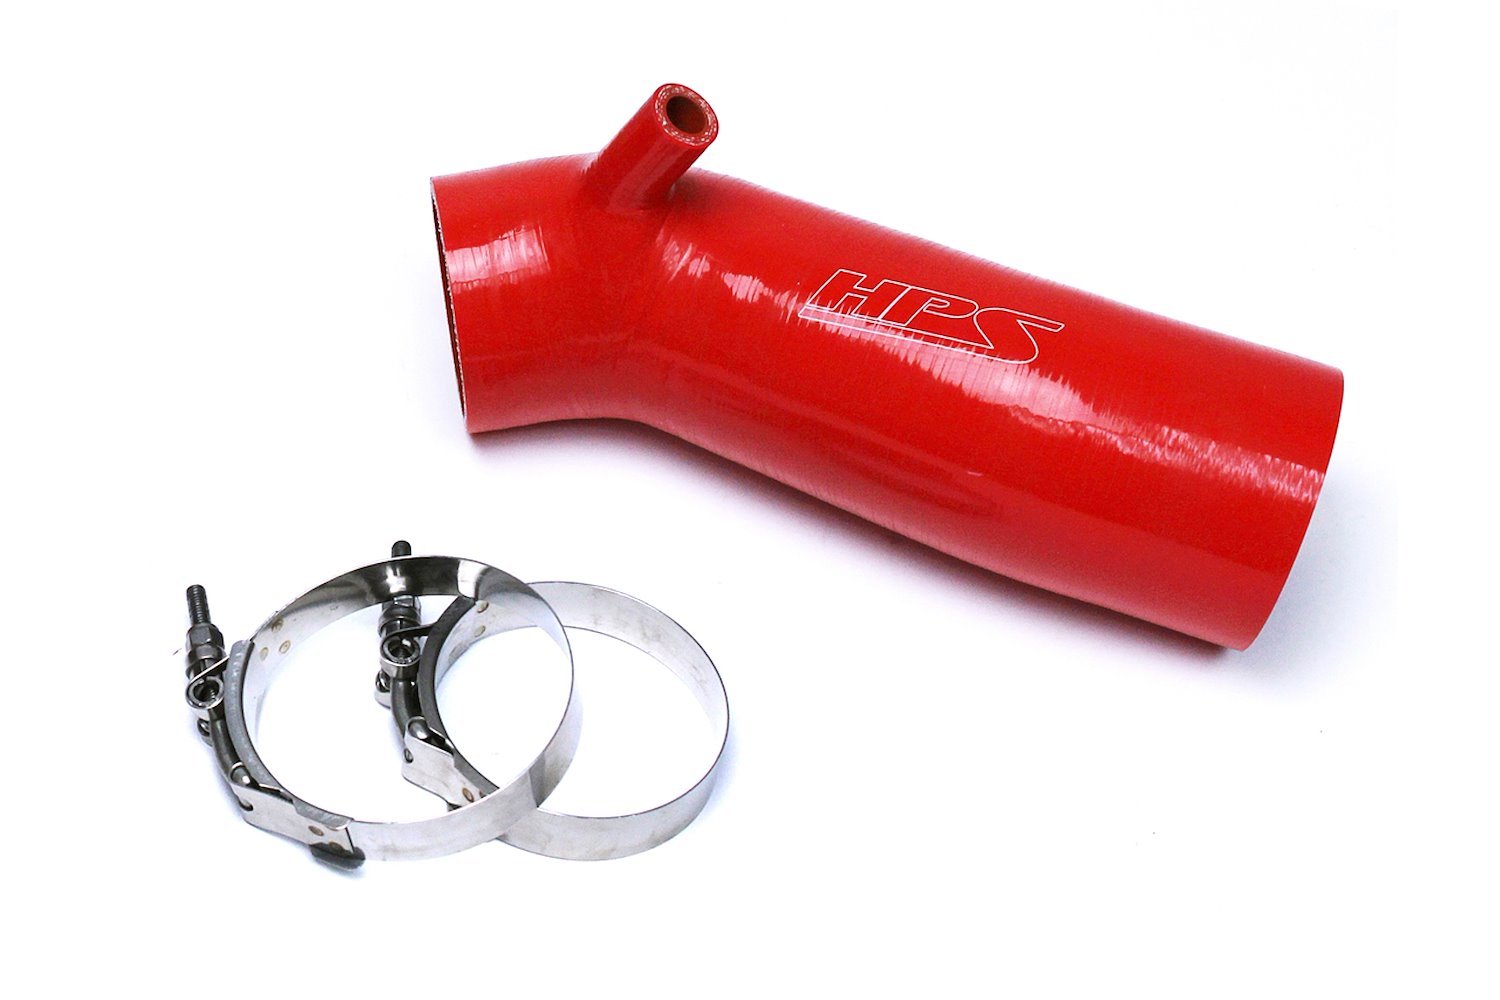 57-1445-RED Silicone Air Intake, Replace Stock Restrictive Air Intake, Improve Throttle Response, No Heat Soak